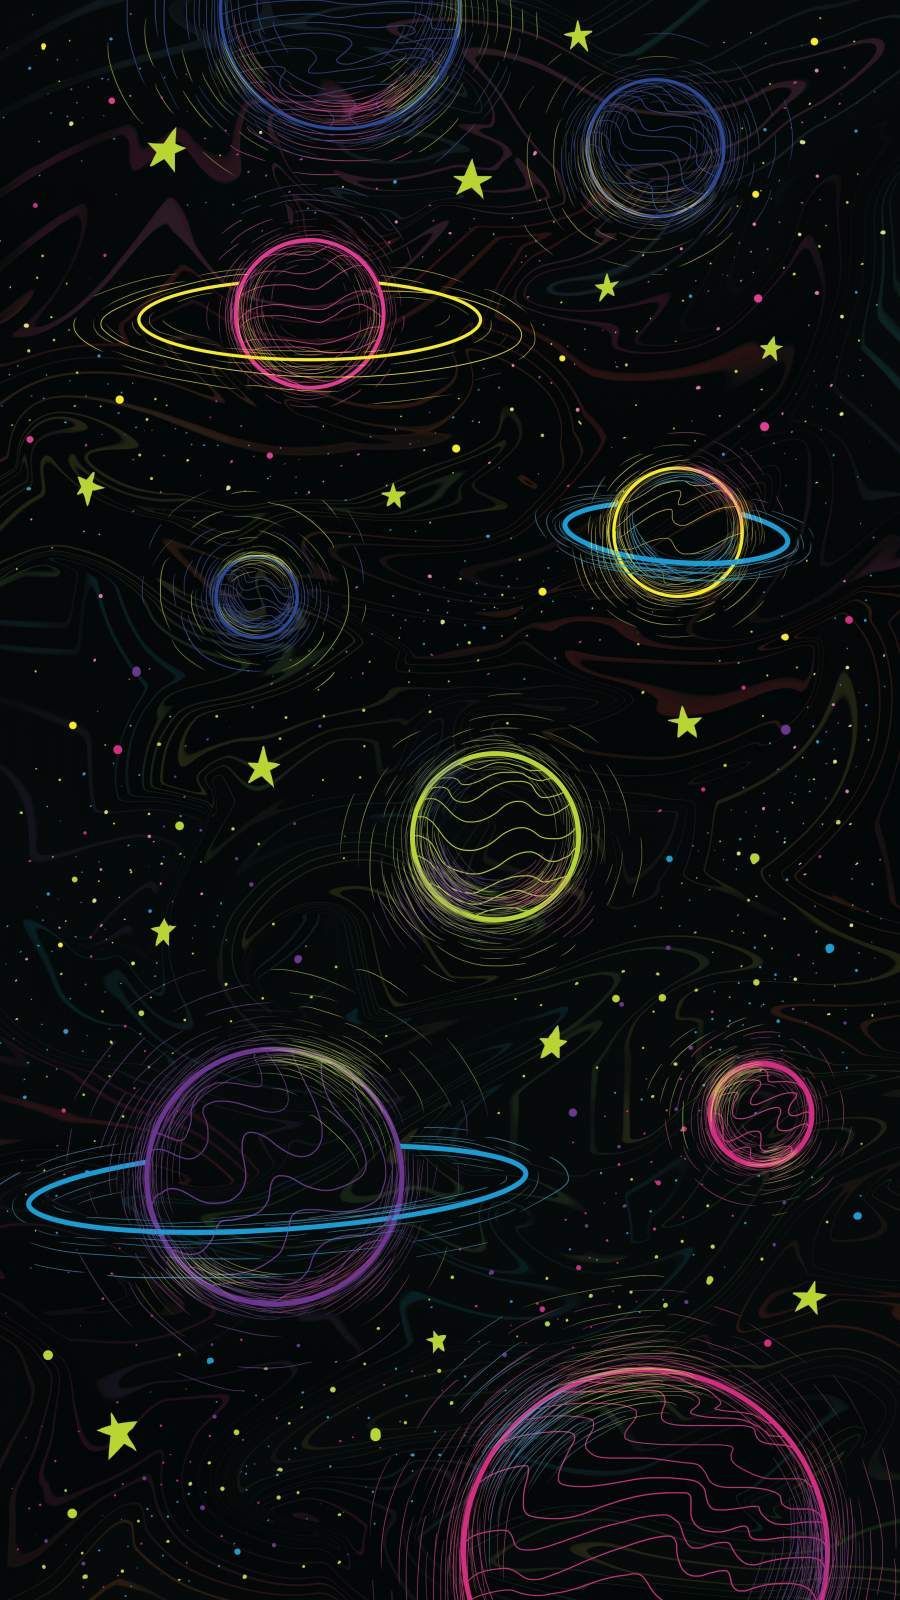 Space Planets Art IPhone Wallpaper. Wallpaper Space, IPhone